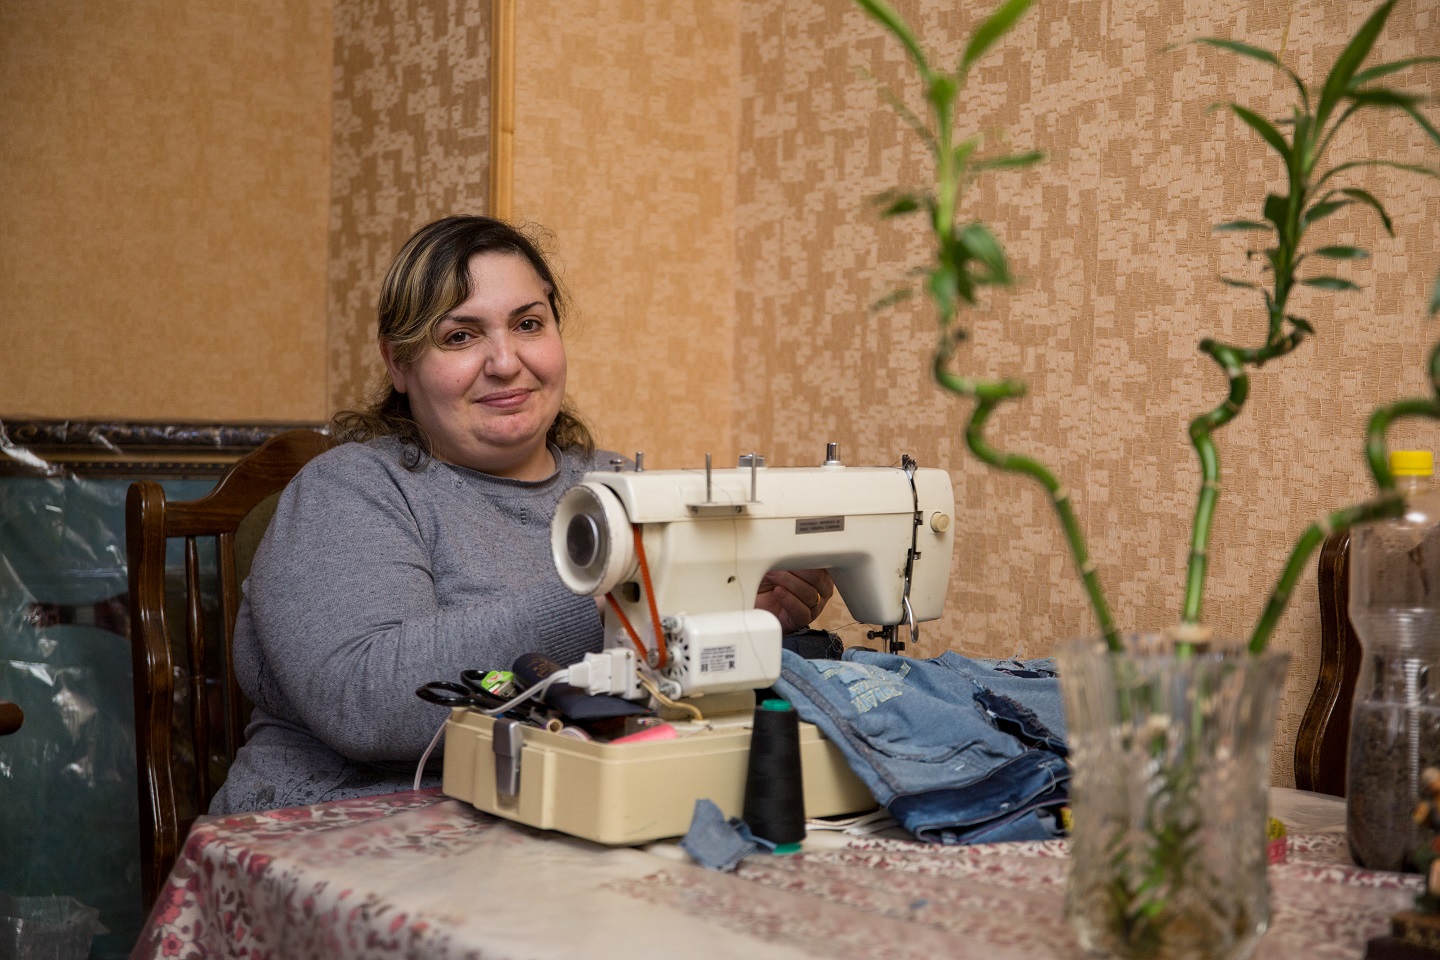 Osana’s sewing machine helps her make some income to support her family © UNHCR/Areg Balayan